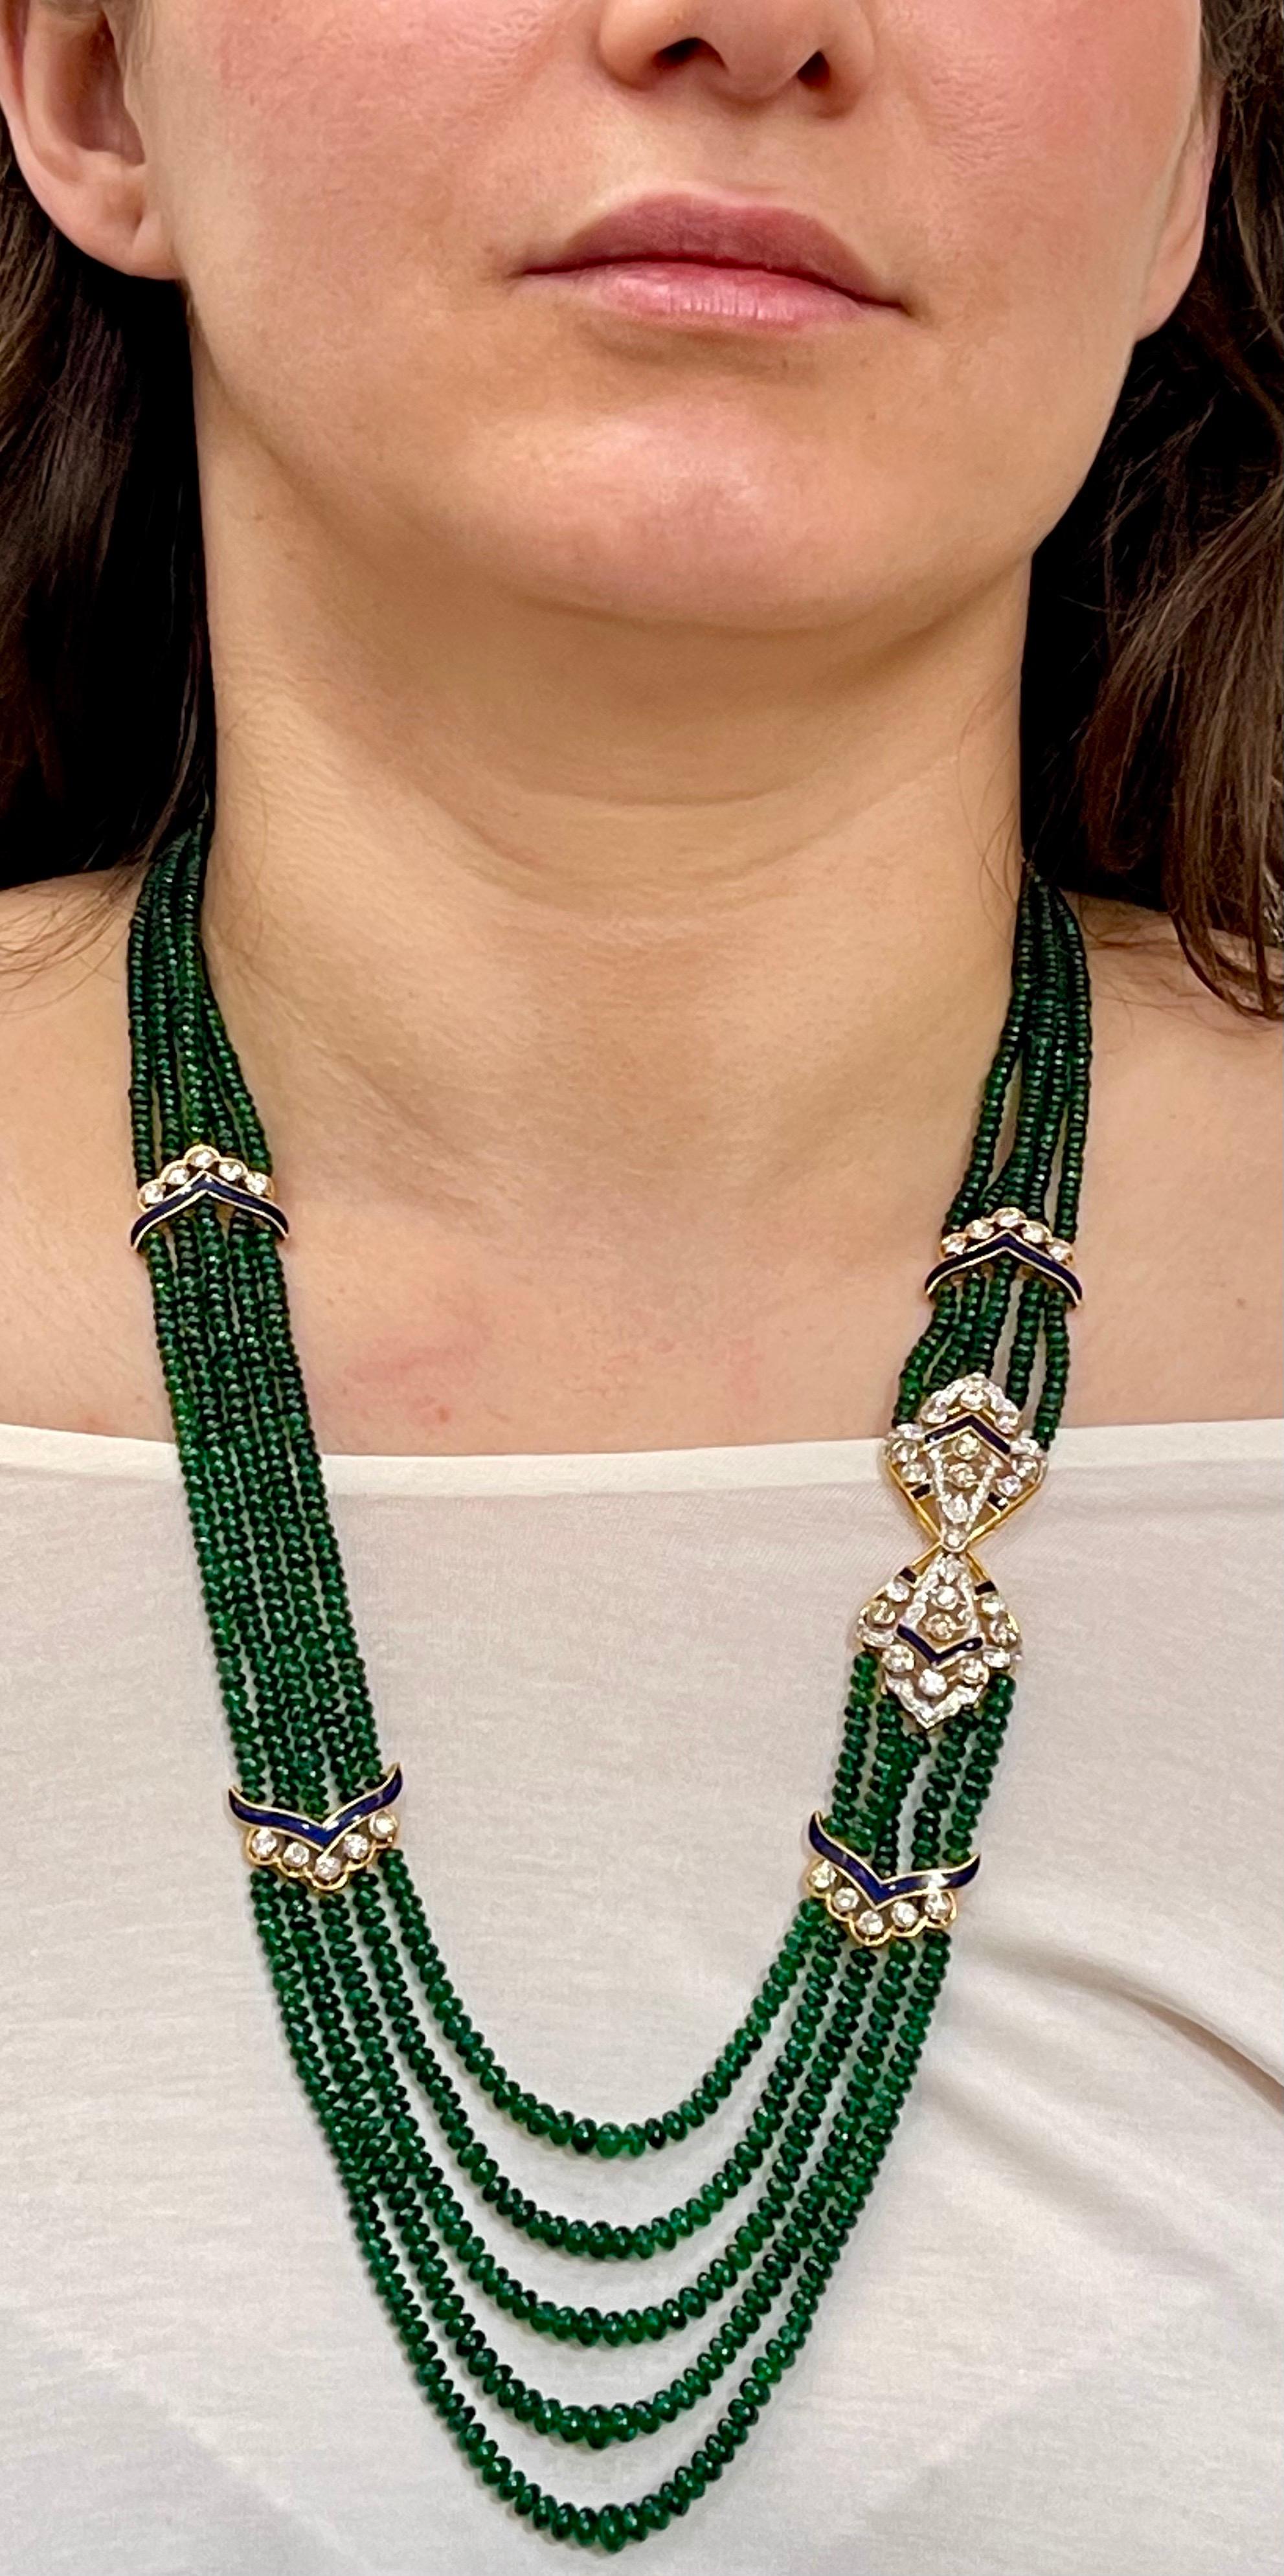 Bead 300 Carat 5-Strand Emerald Necklace with 4.8 Carat Diamond & Enamel in 14k Gold For Sale